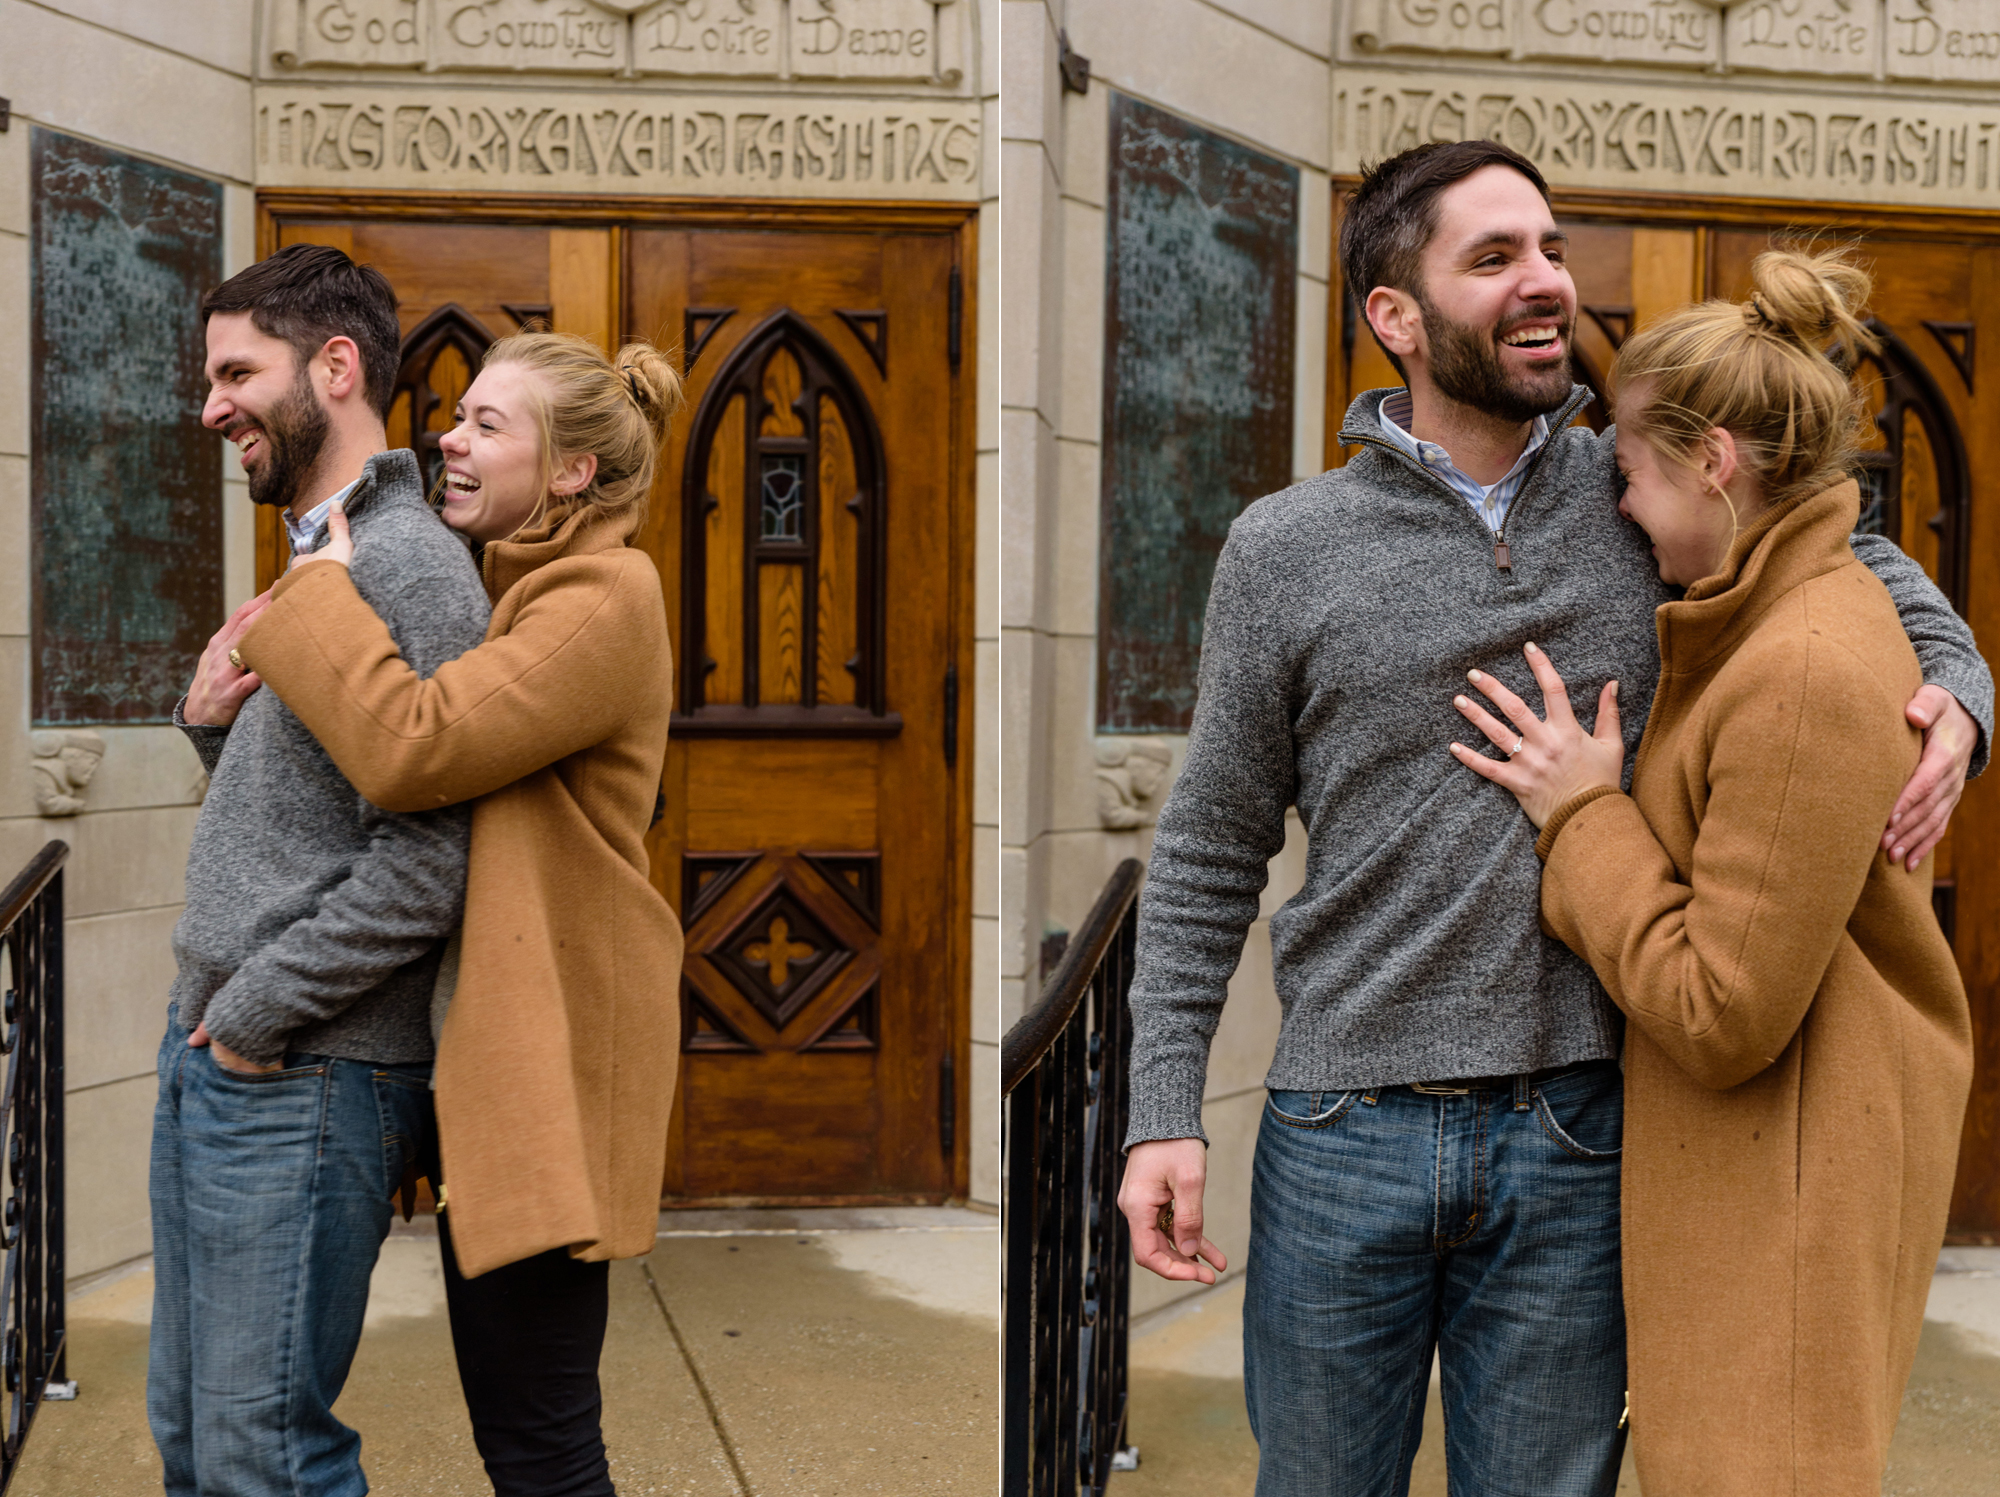 Newly engaged couple in front of God Country Door on the campus of the University of Notre Dame